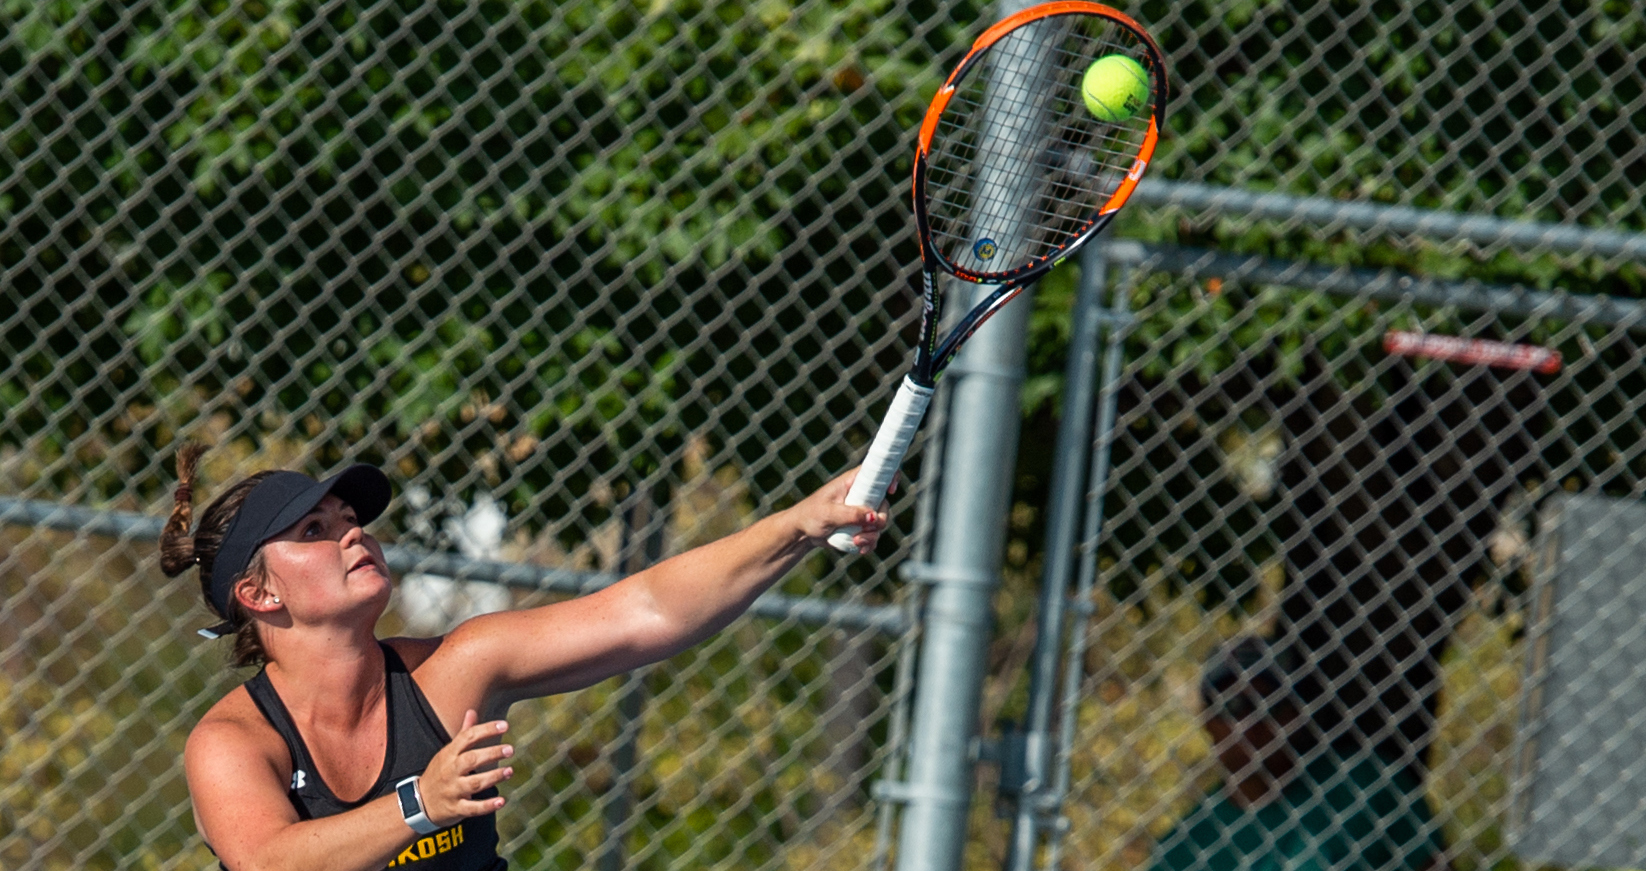 Samantha Koppa was victorious at both No. 1 doubles and No. 2 singles against the Green Knights.